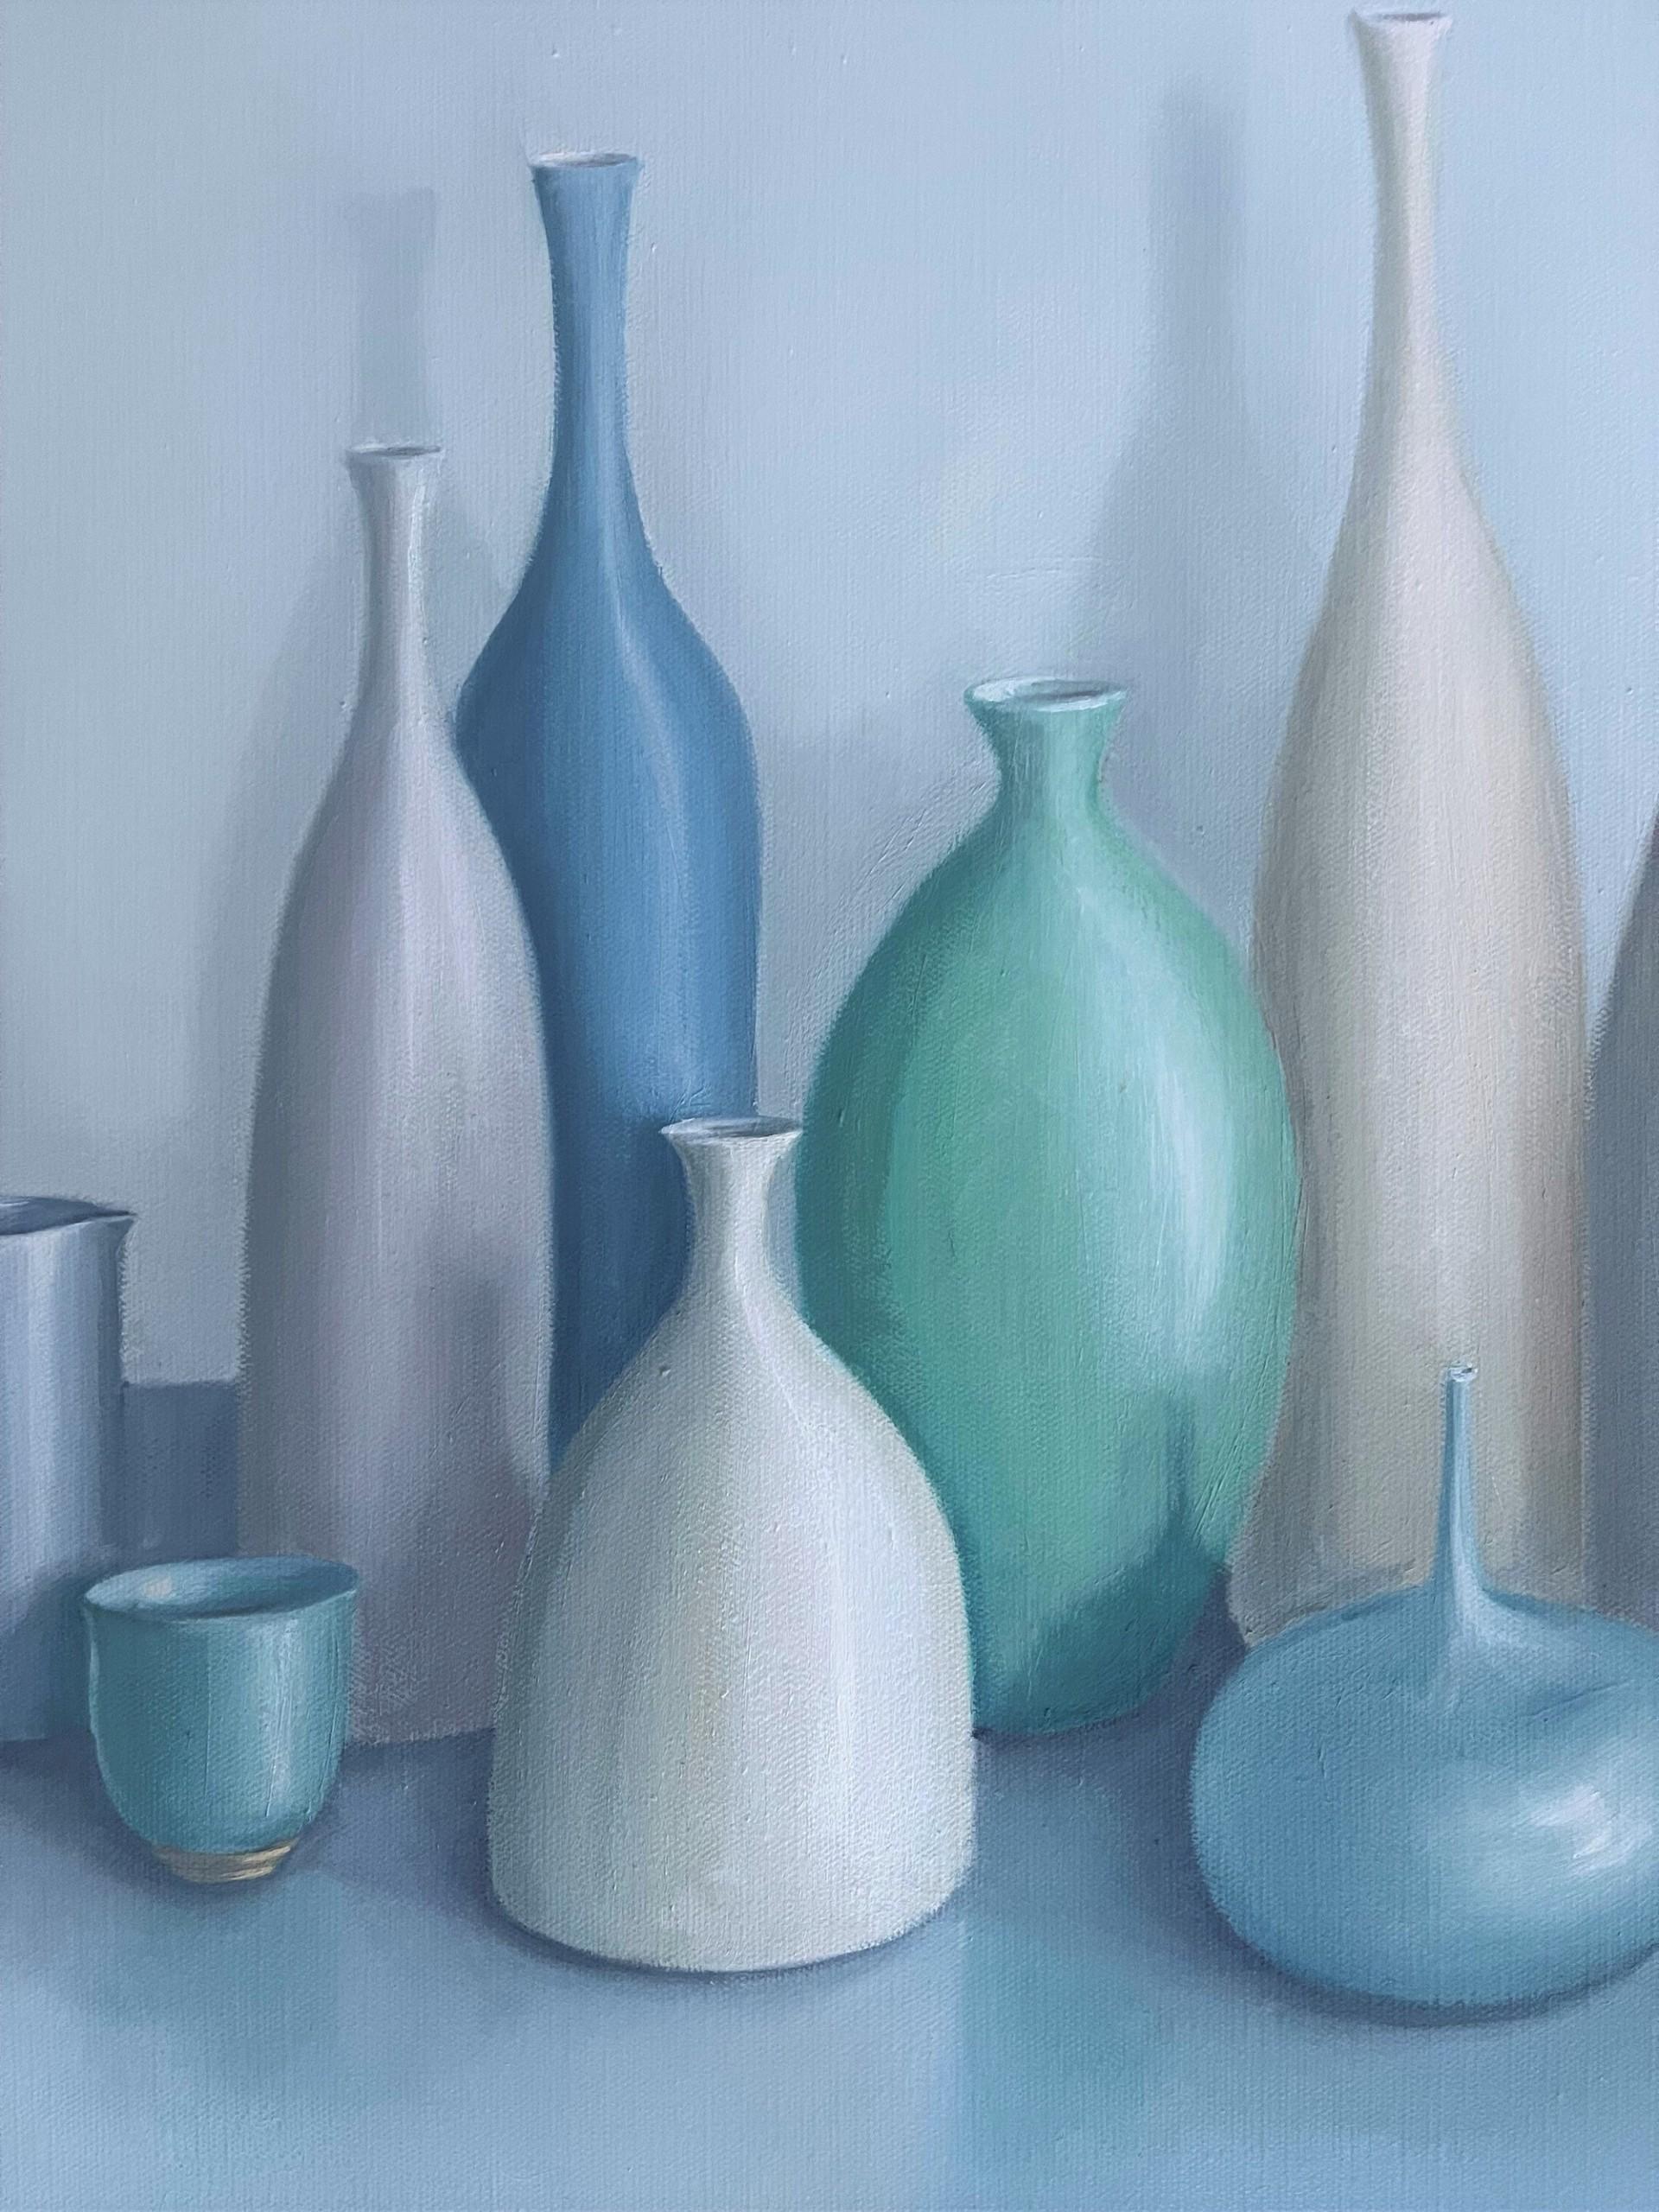 Clustered Pots - Painting by Jonquil Williamson 